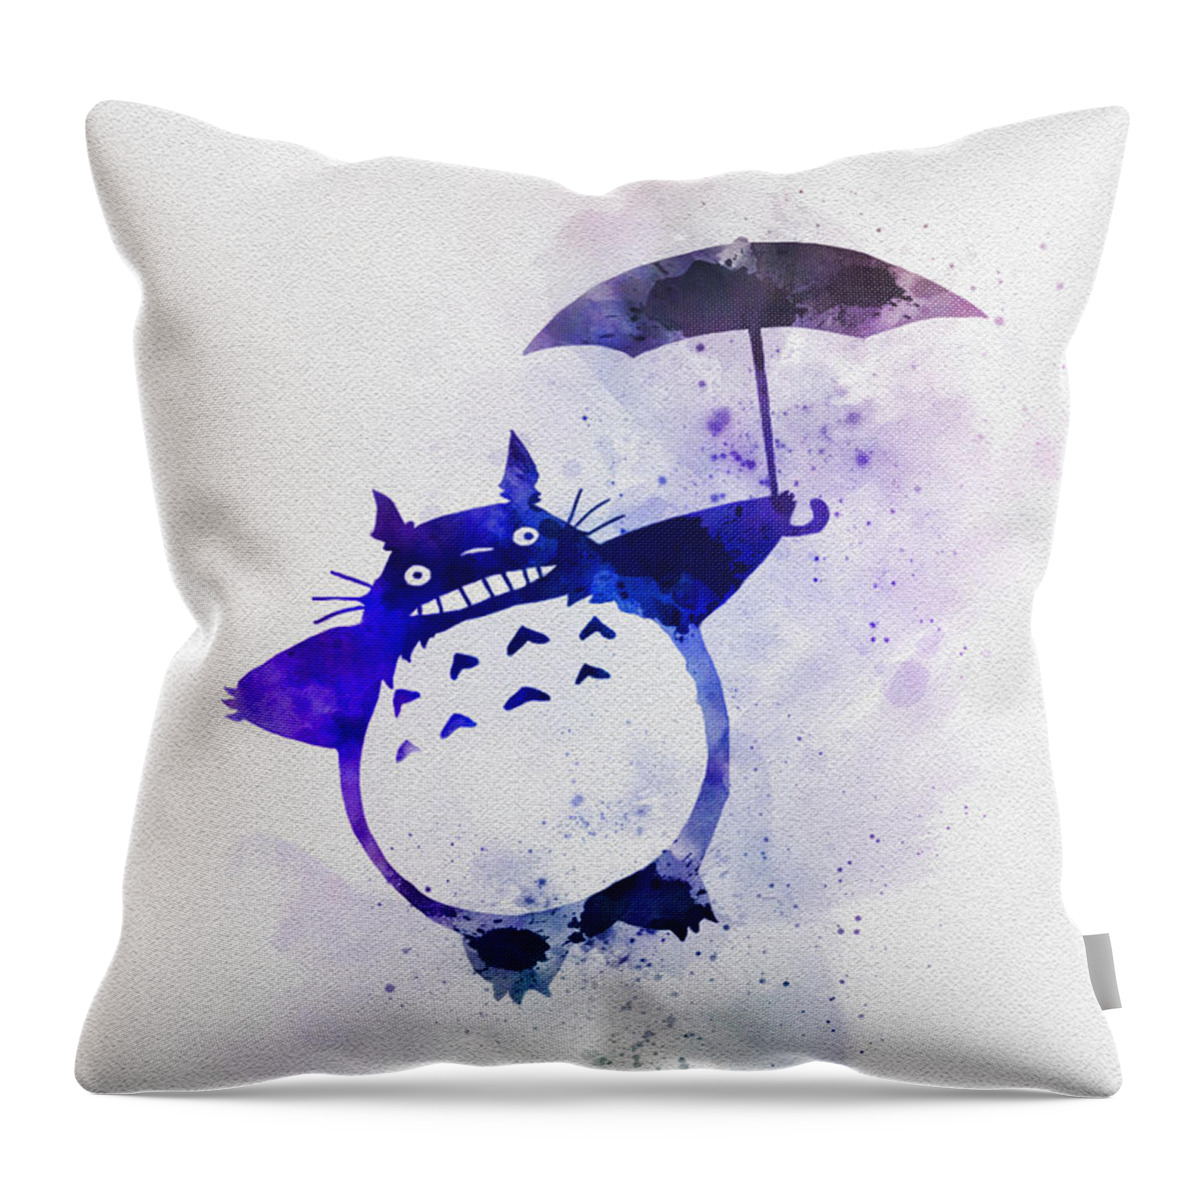 Totoro Throw Pillow featuring the mixed media Totoro by My Inspiration